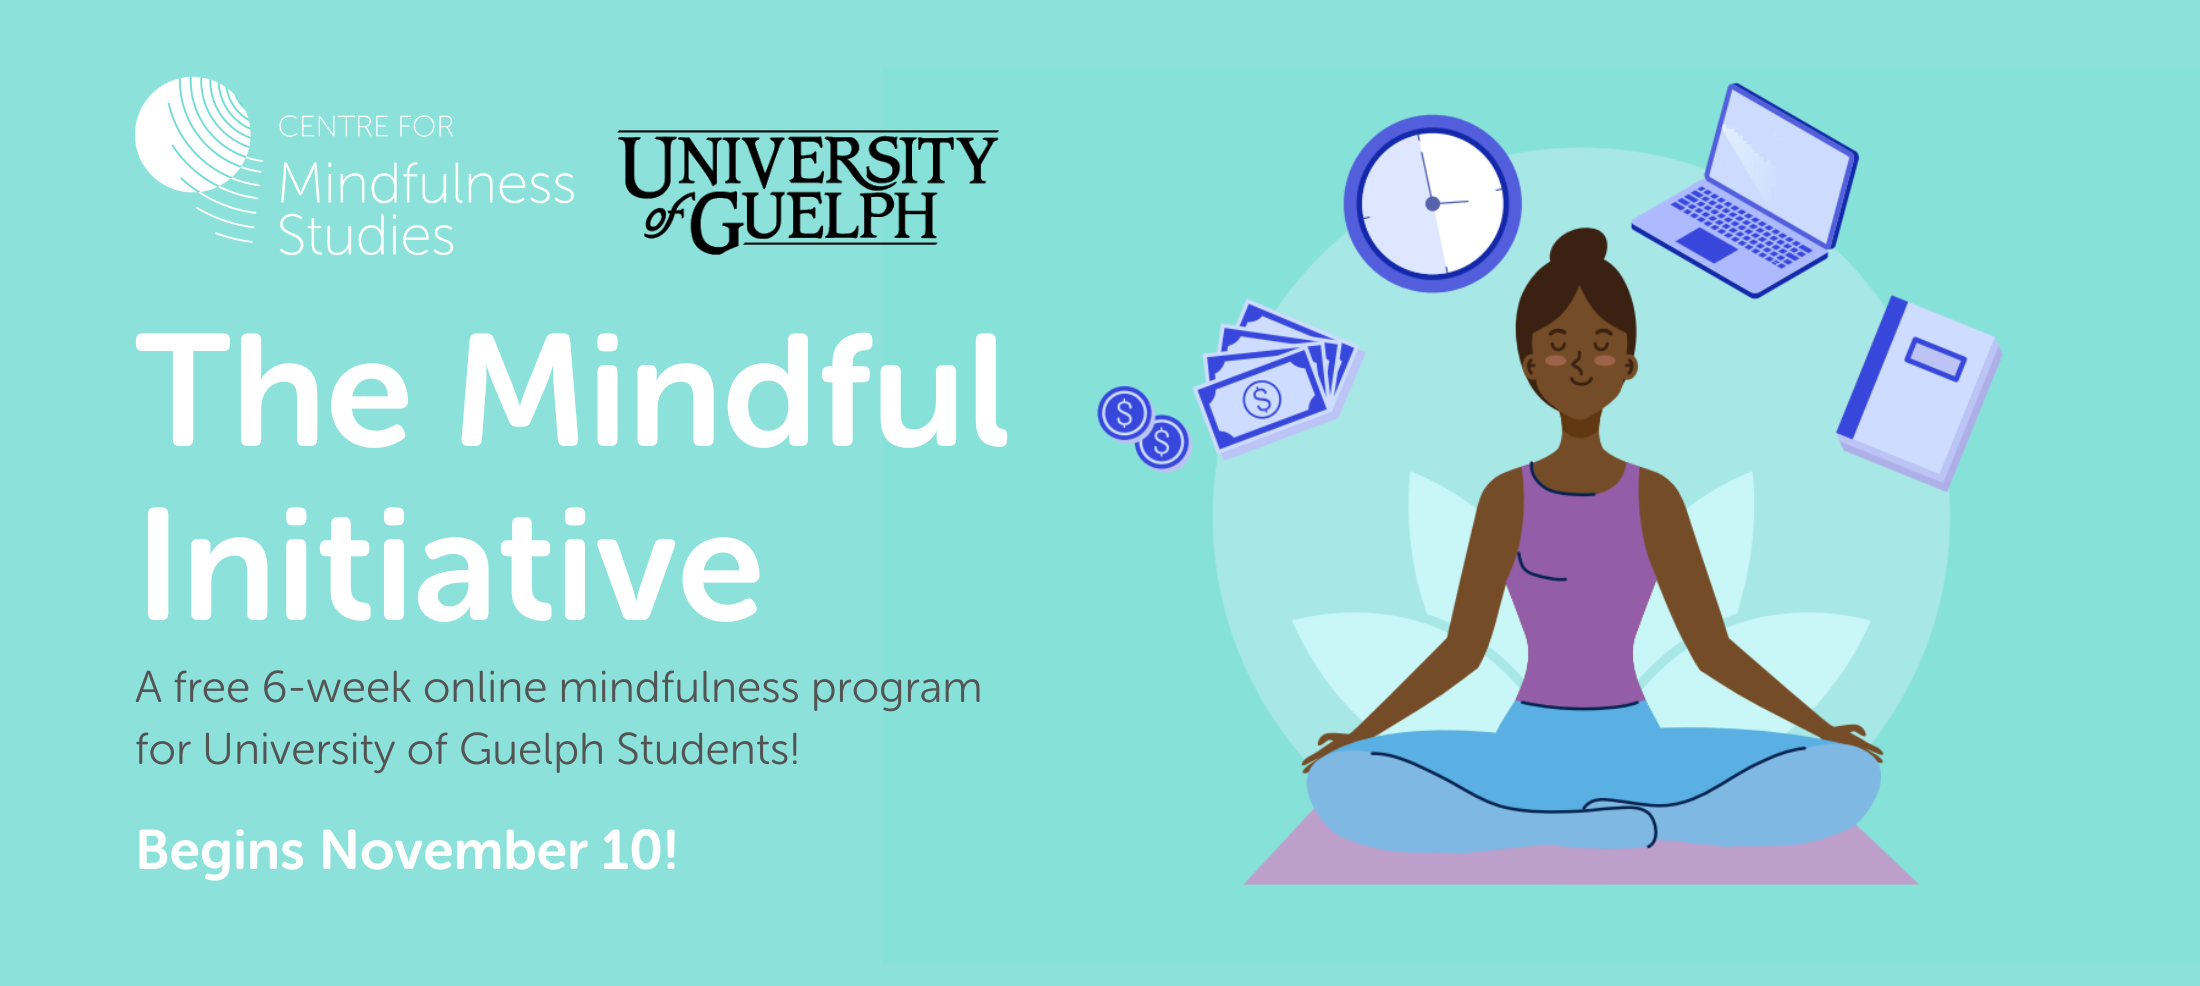 The Mindful Initiative – University of Guelph